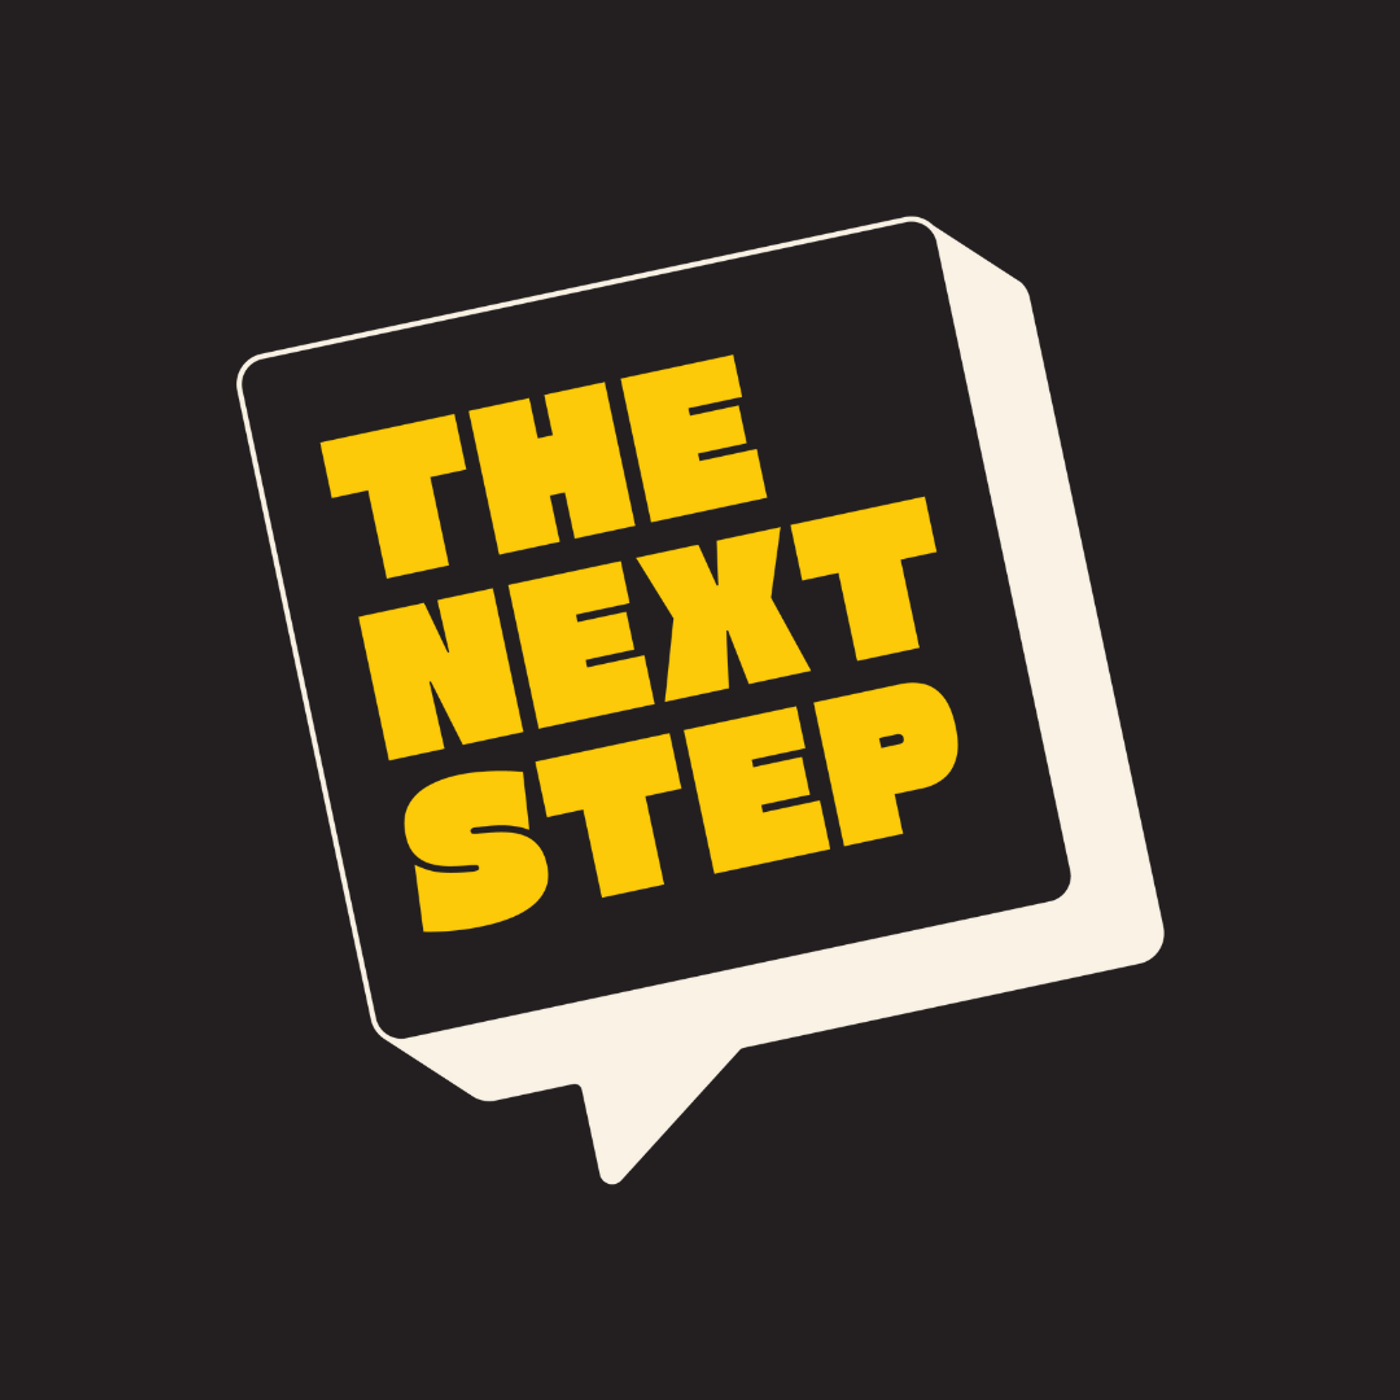 S6 Ep272: Interview: Comedian Laurie Kilmartin (The Next Step)